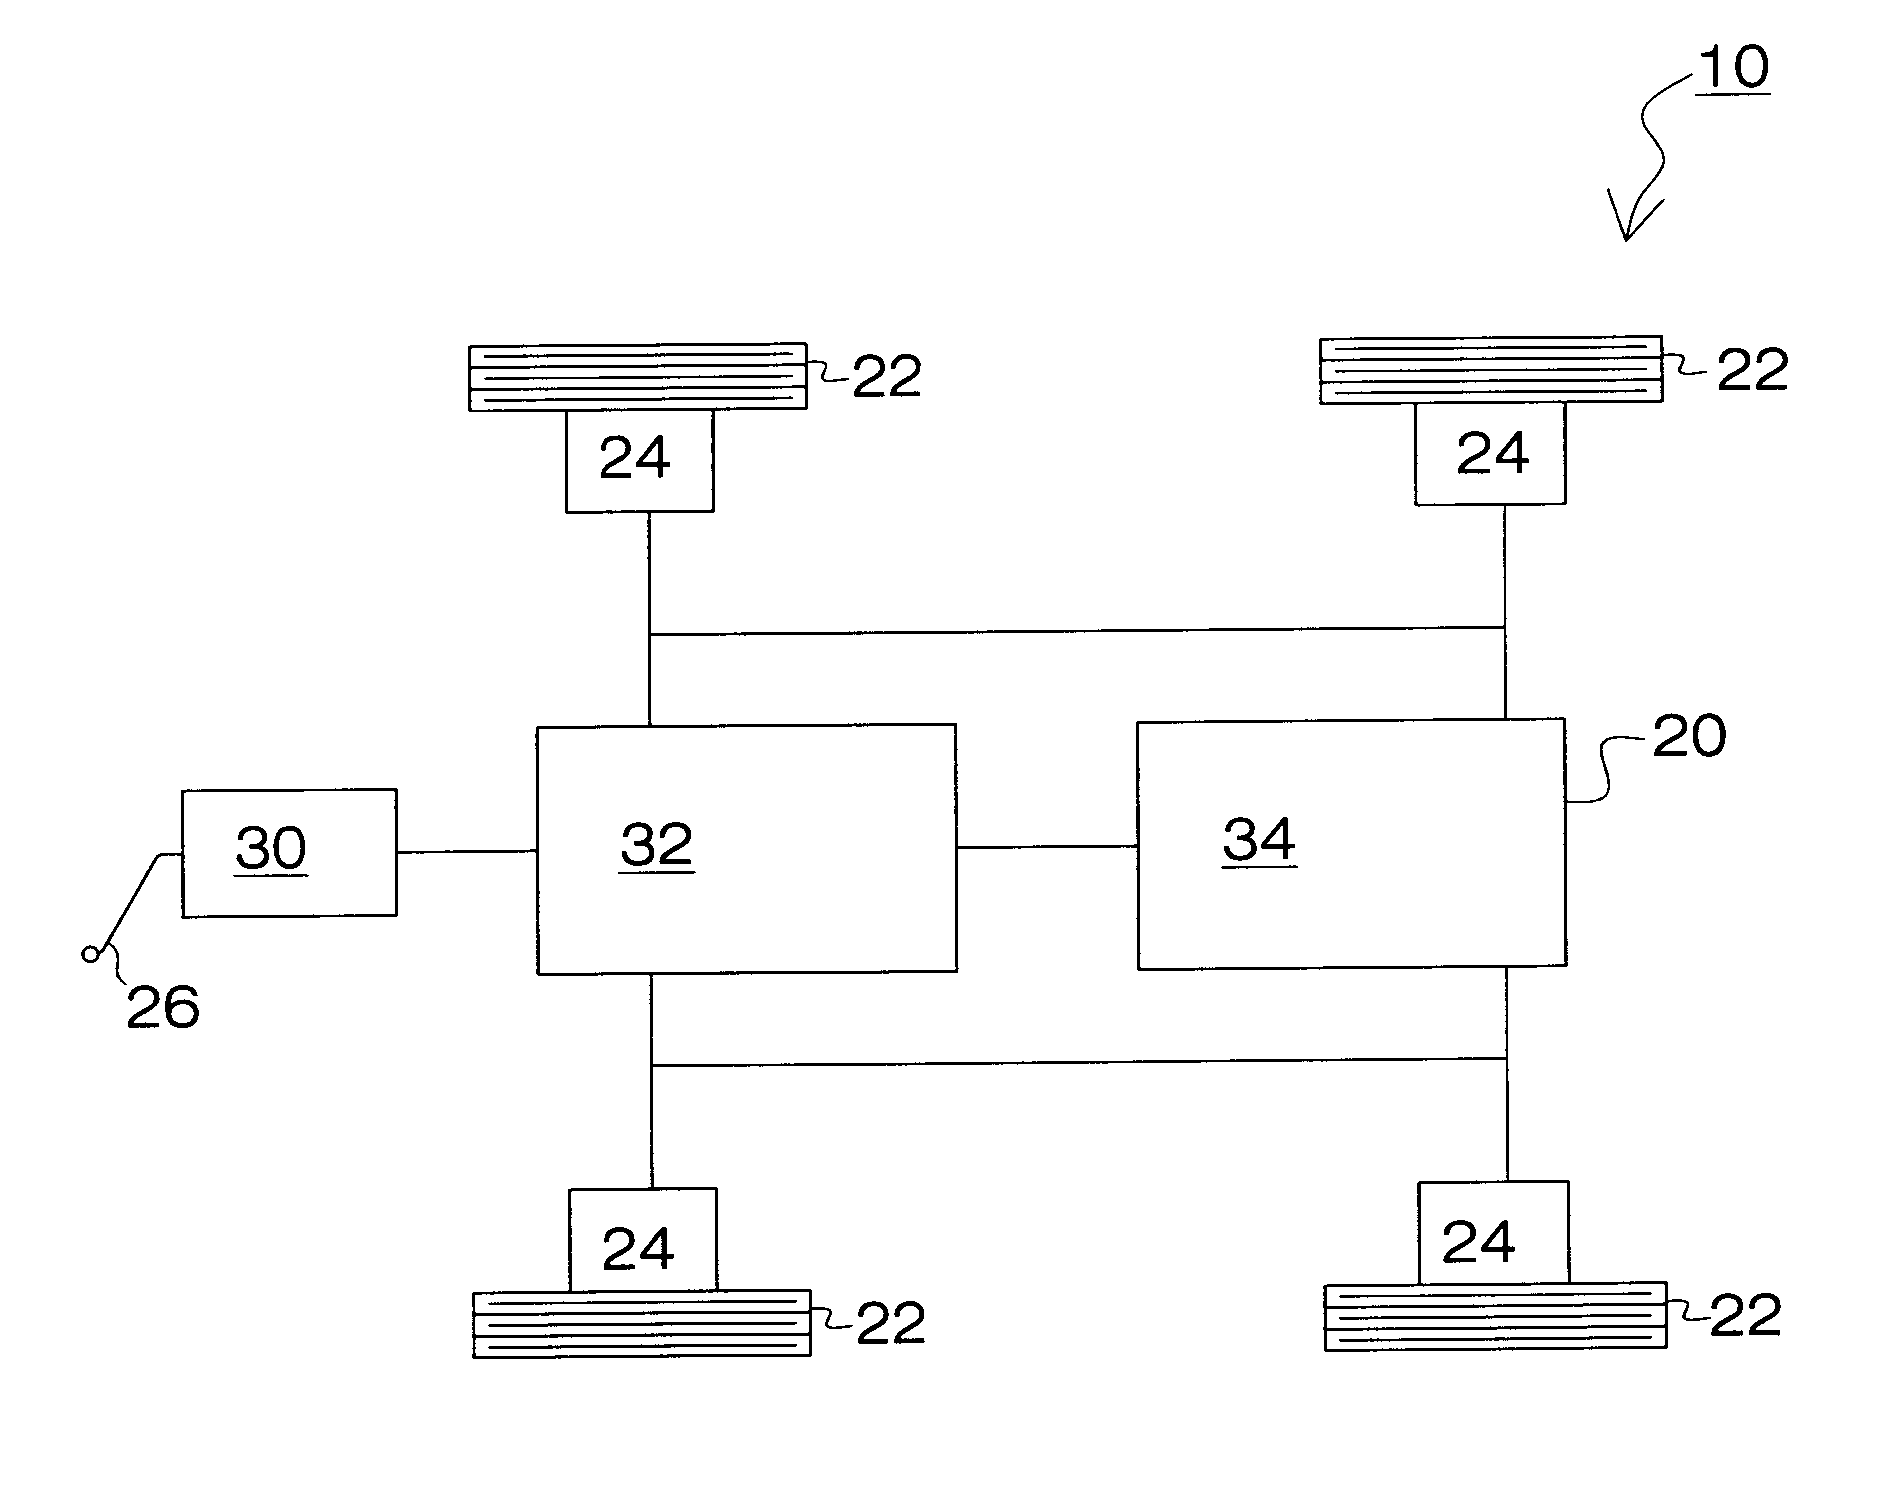 Method and Apparatus for Charging Electric Devices